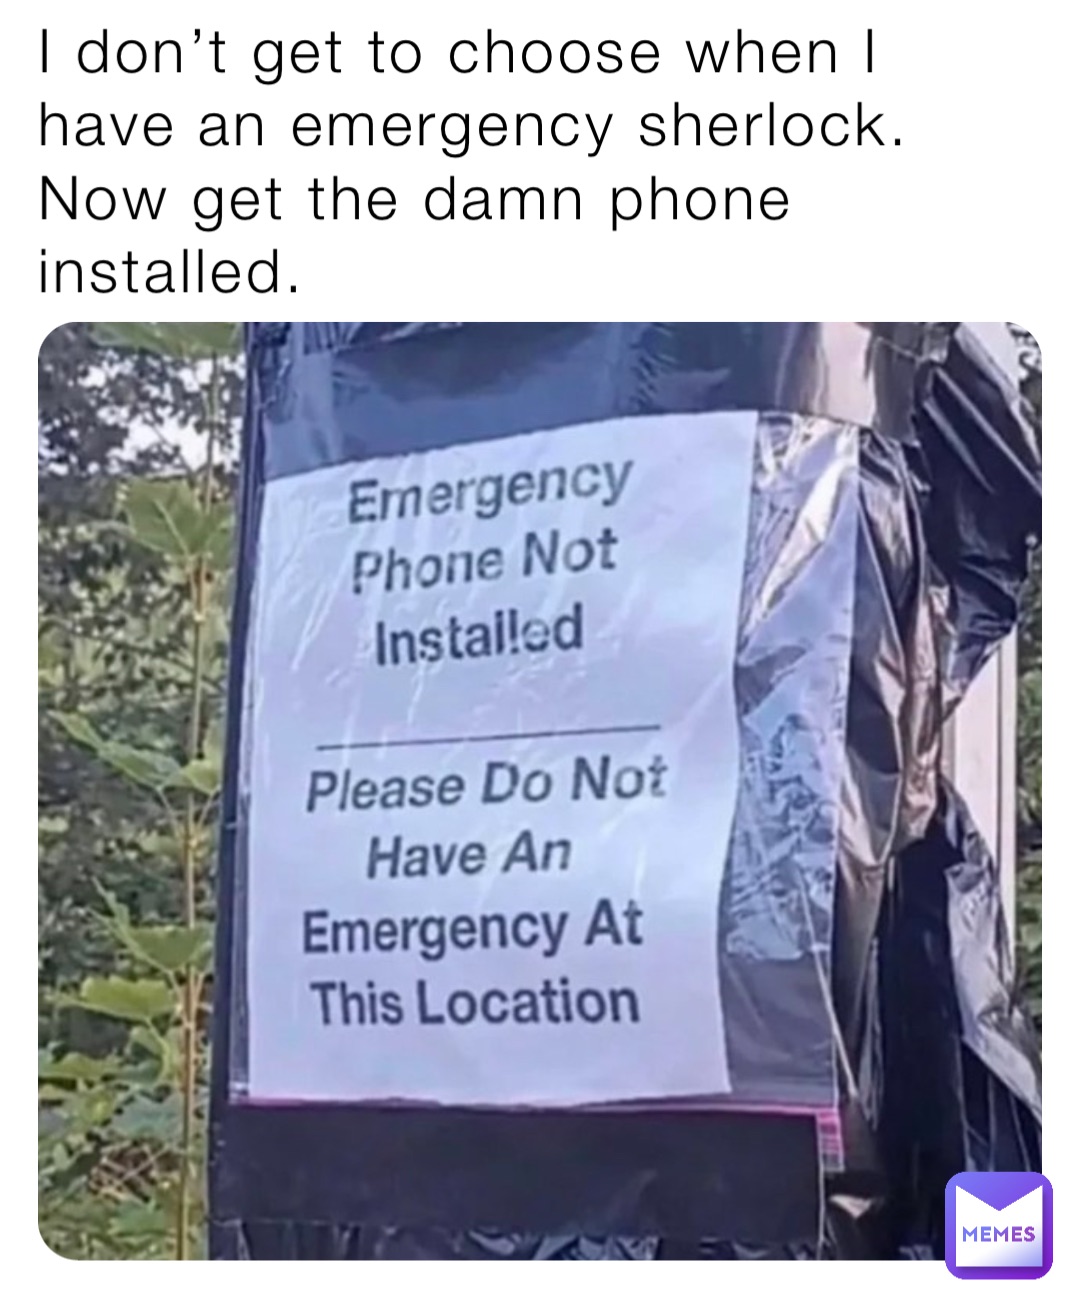 I don’t get to choose when I have an emergency sherlock.
Now get the damn phone installed.